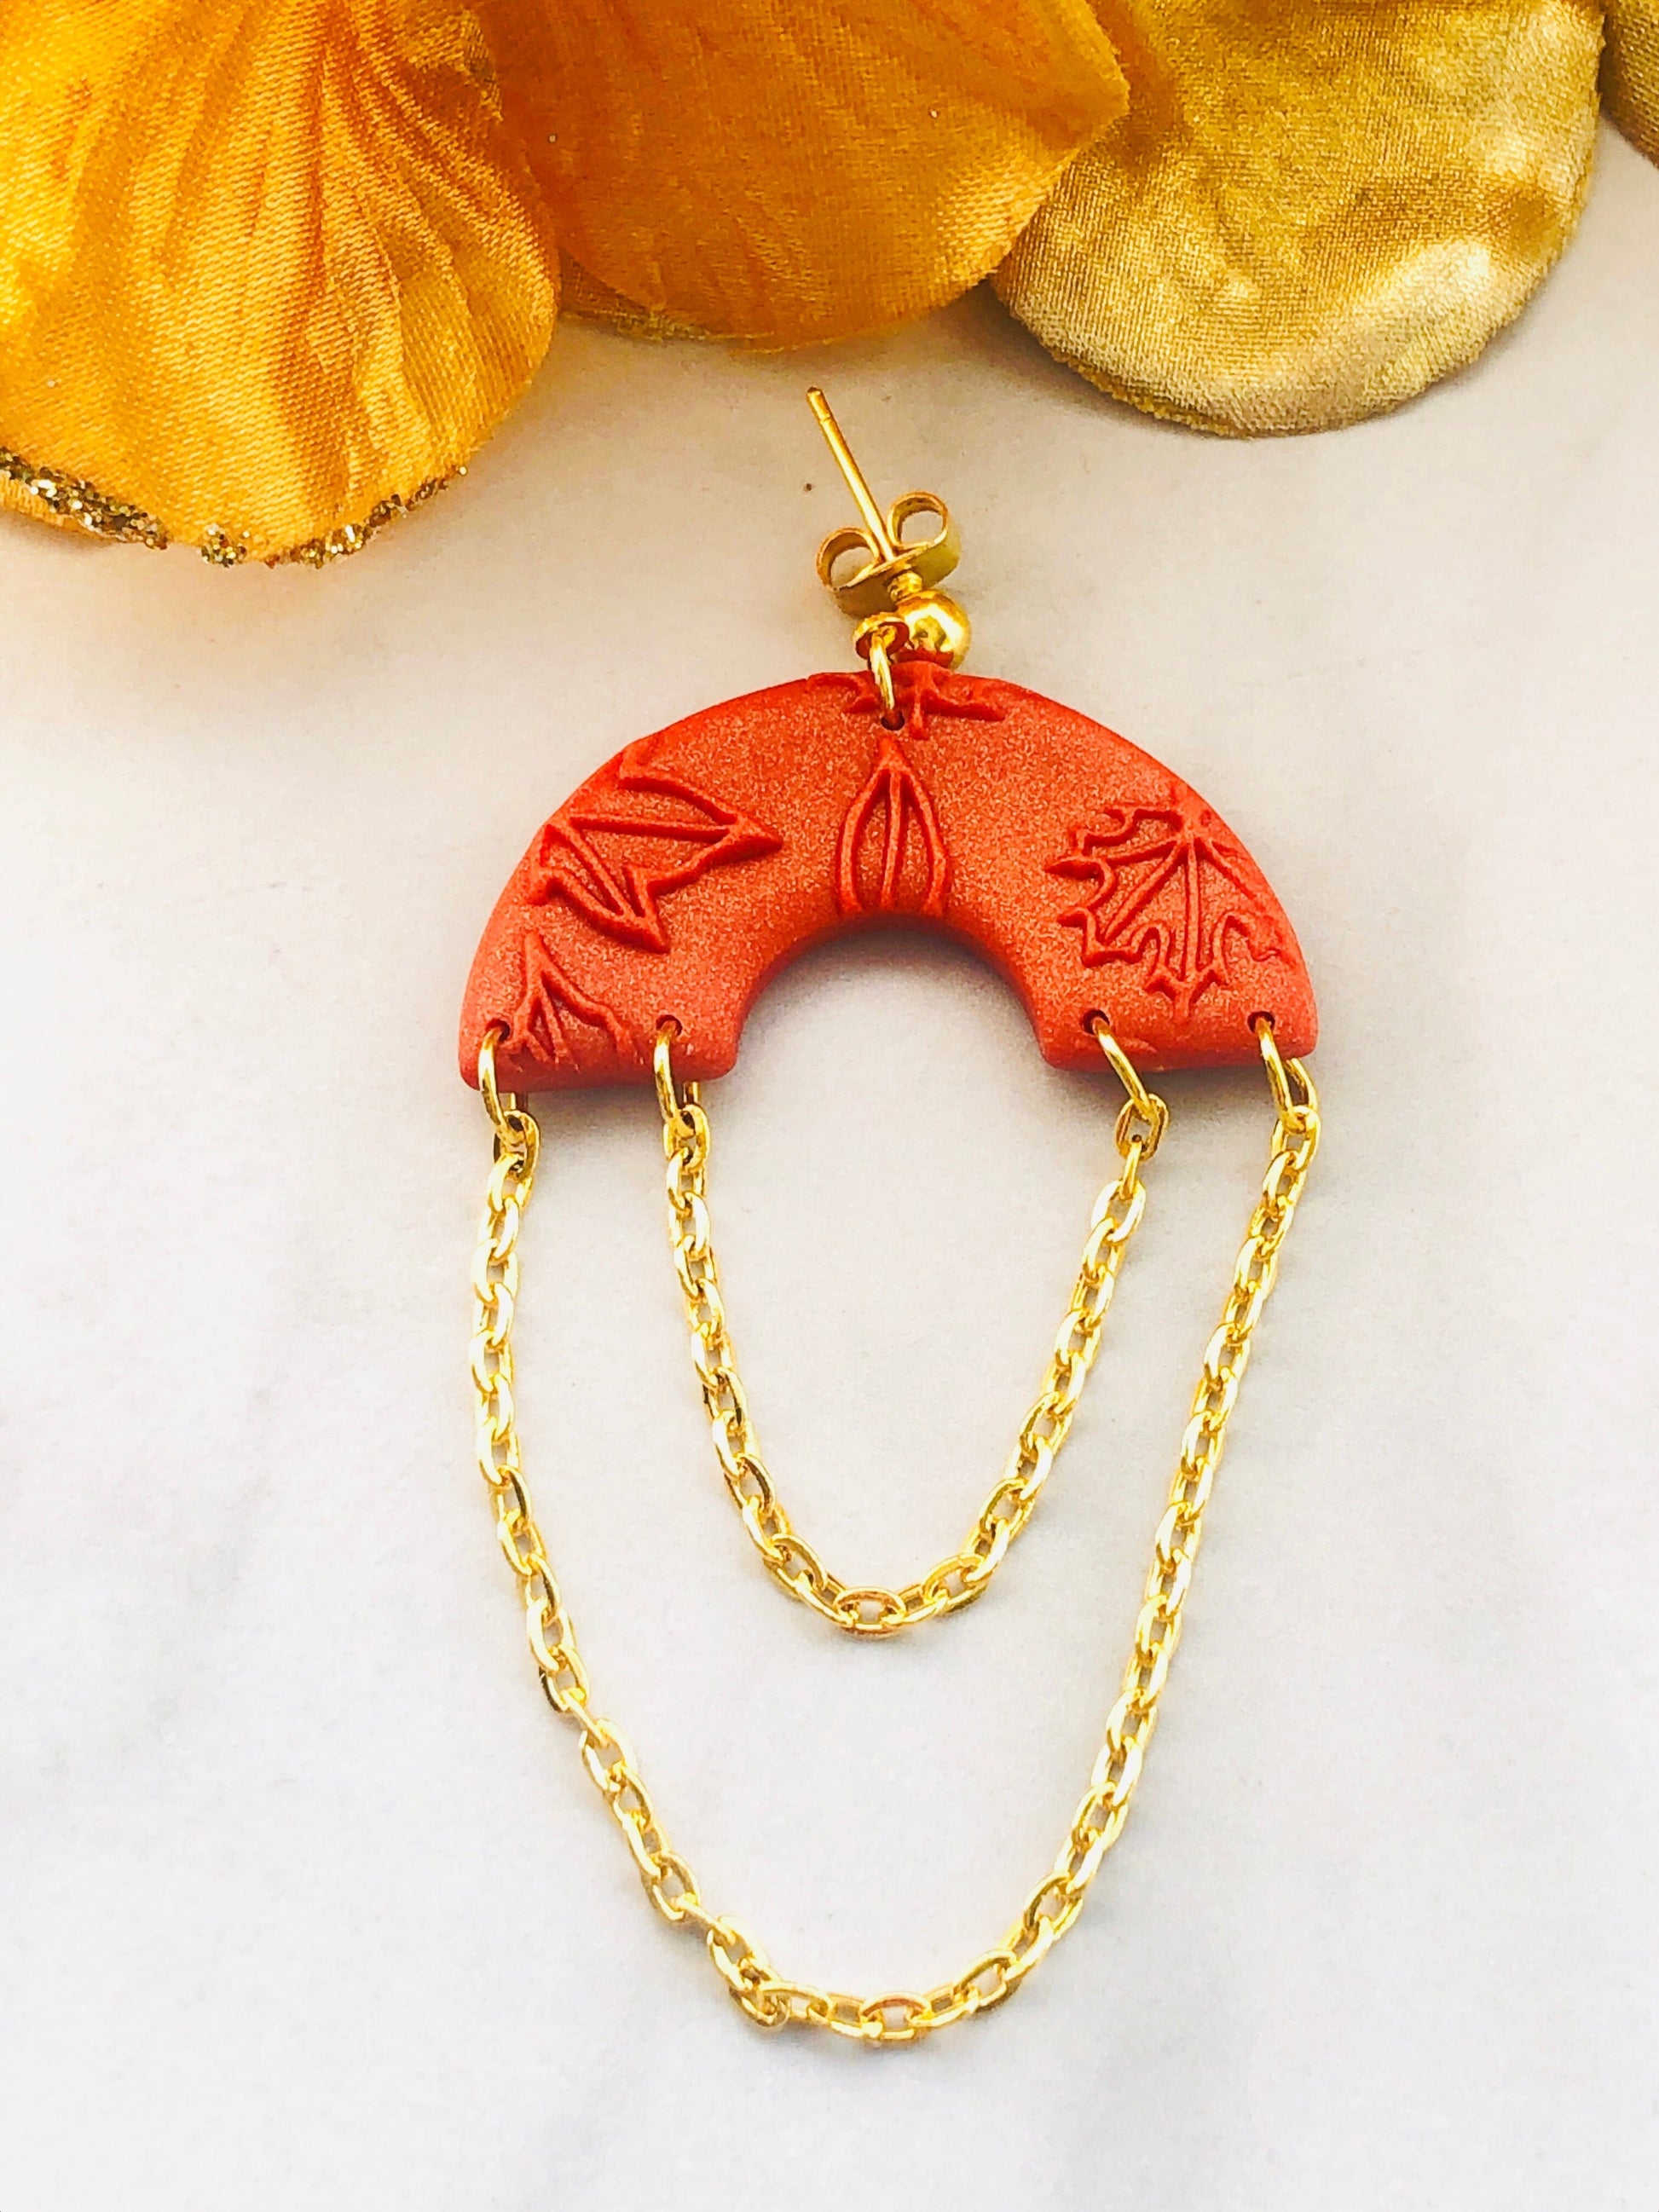 Earrings Maple - Orange Leaf Embossed Arch with Dangling Gold Chain